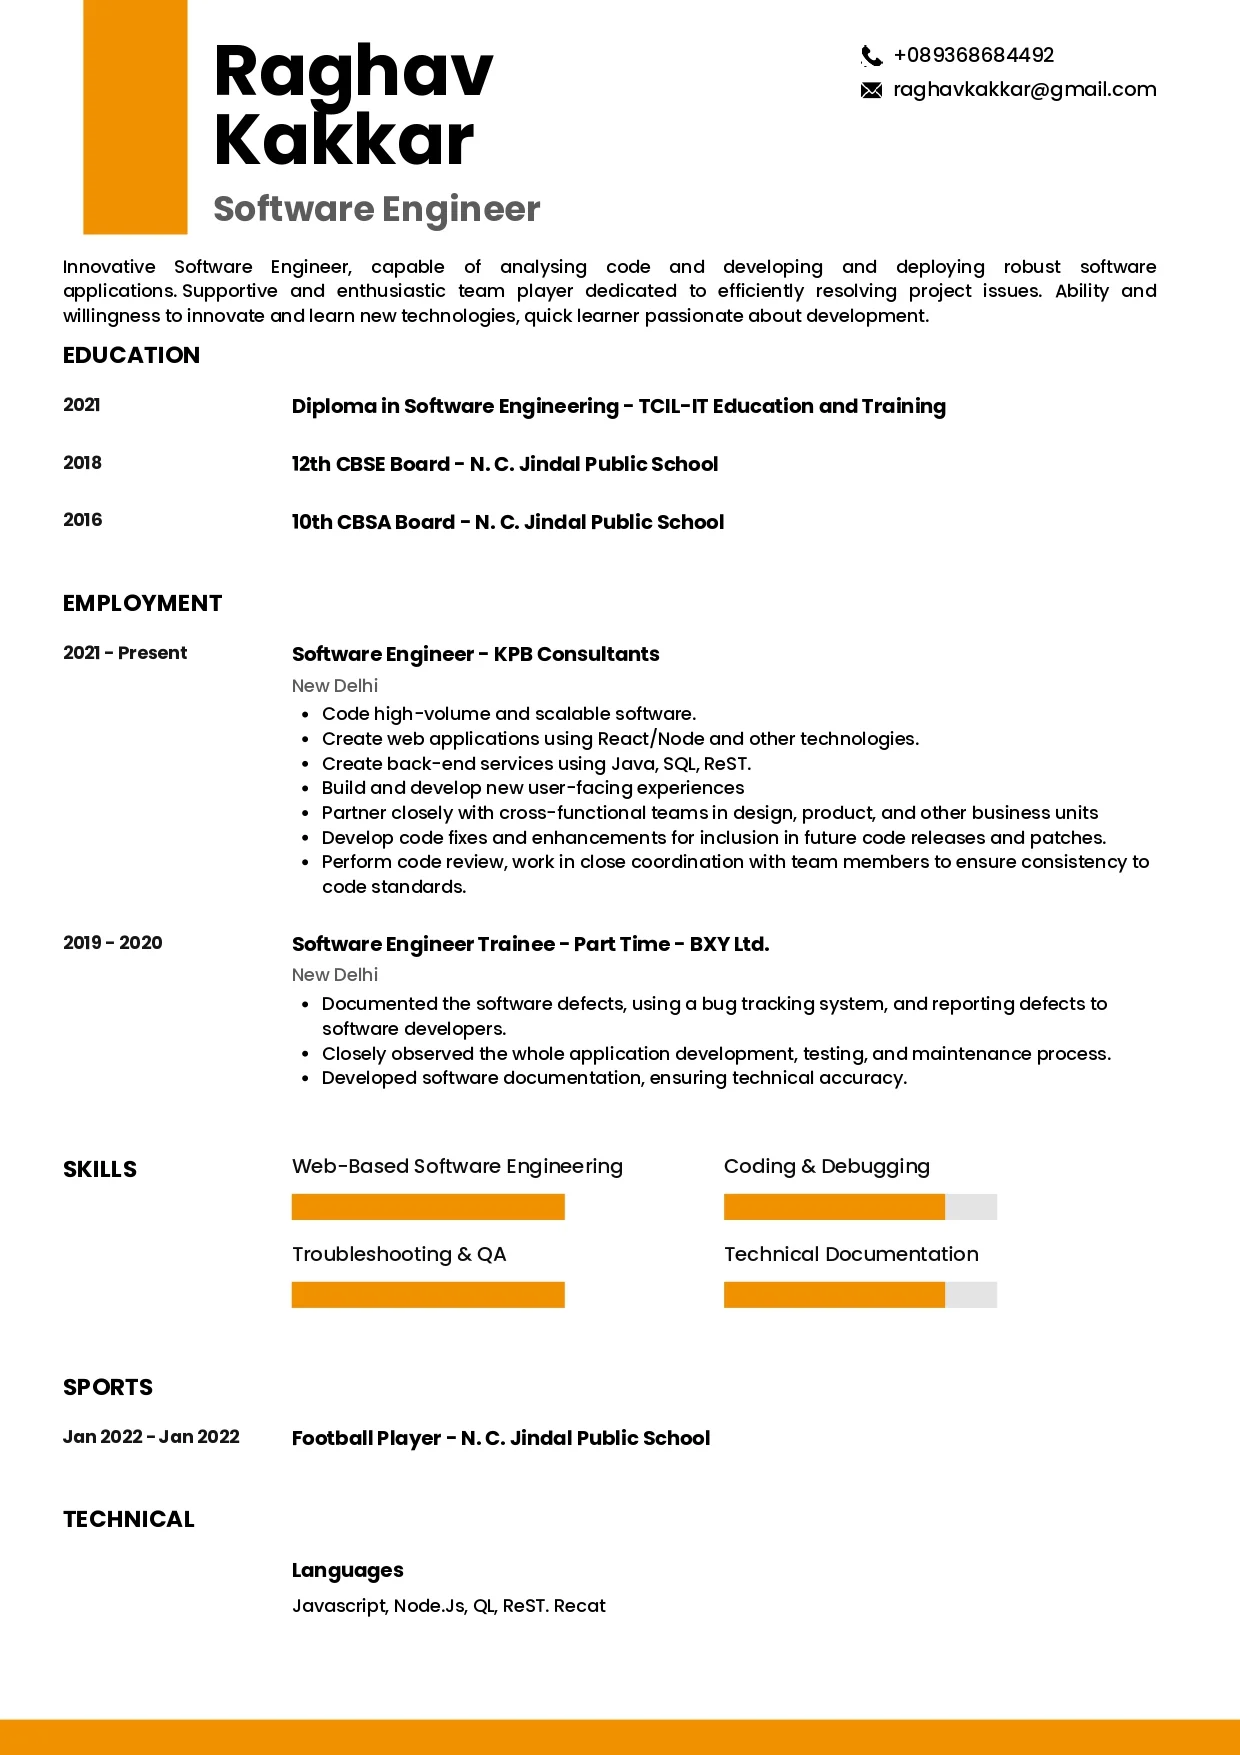 Sample Resume of Software Engineer | Free Resume Templates & Samples on Resumod.co